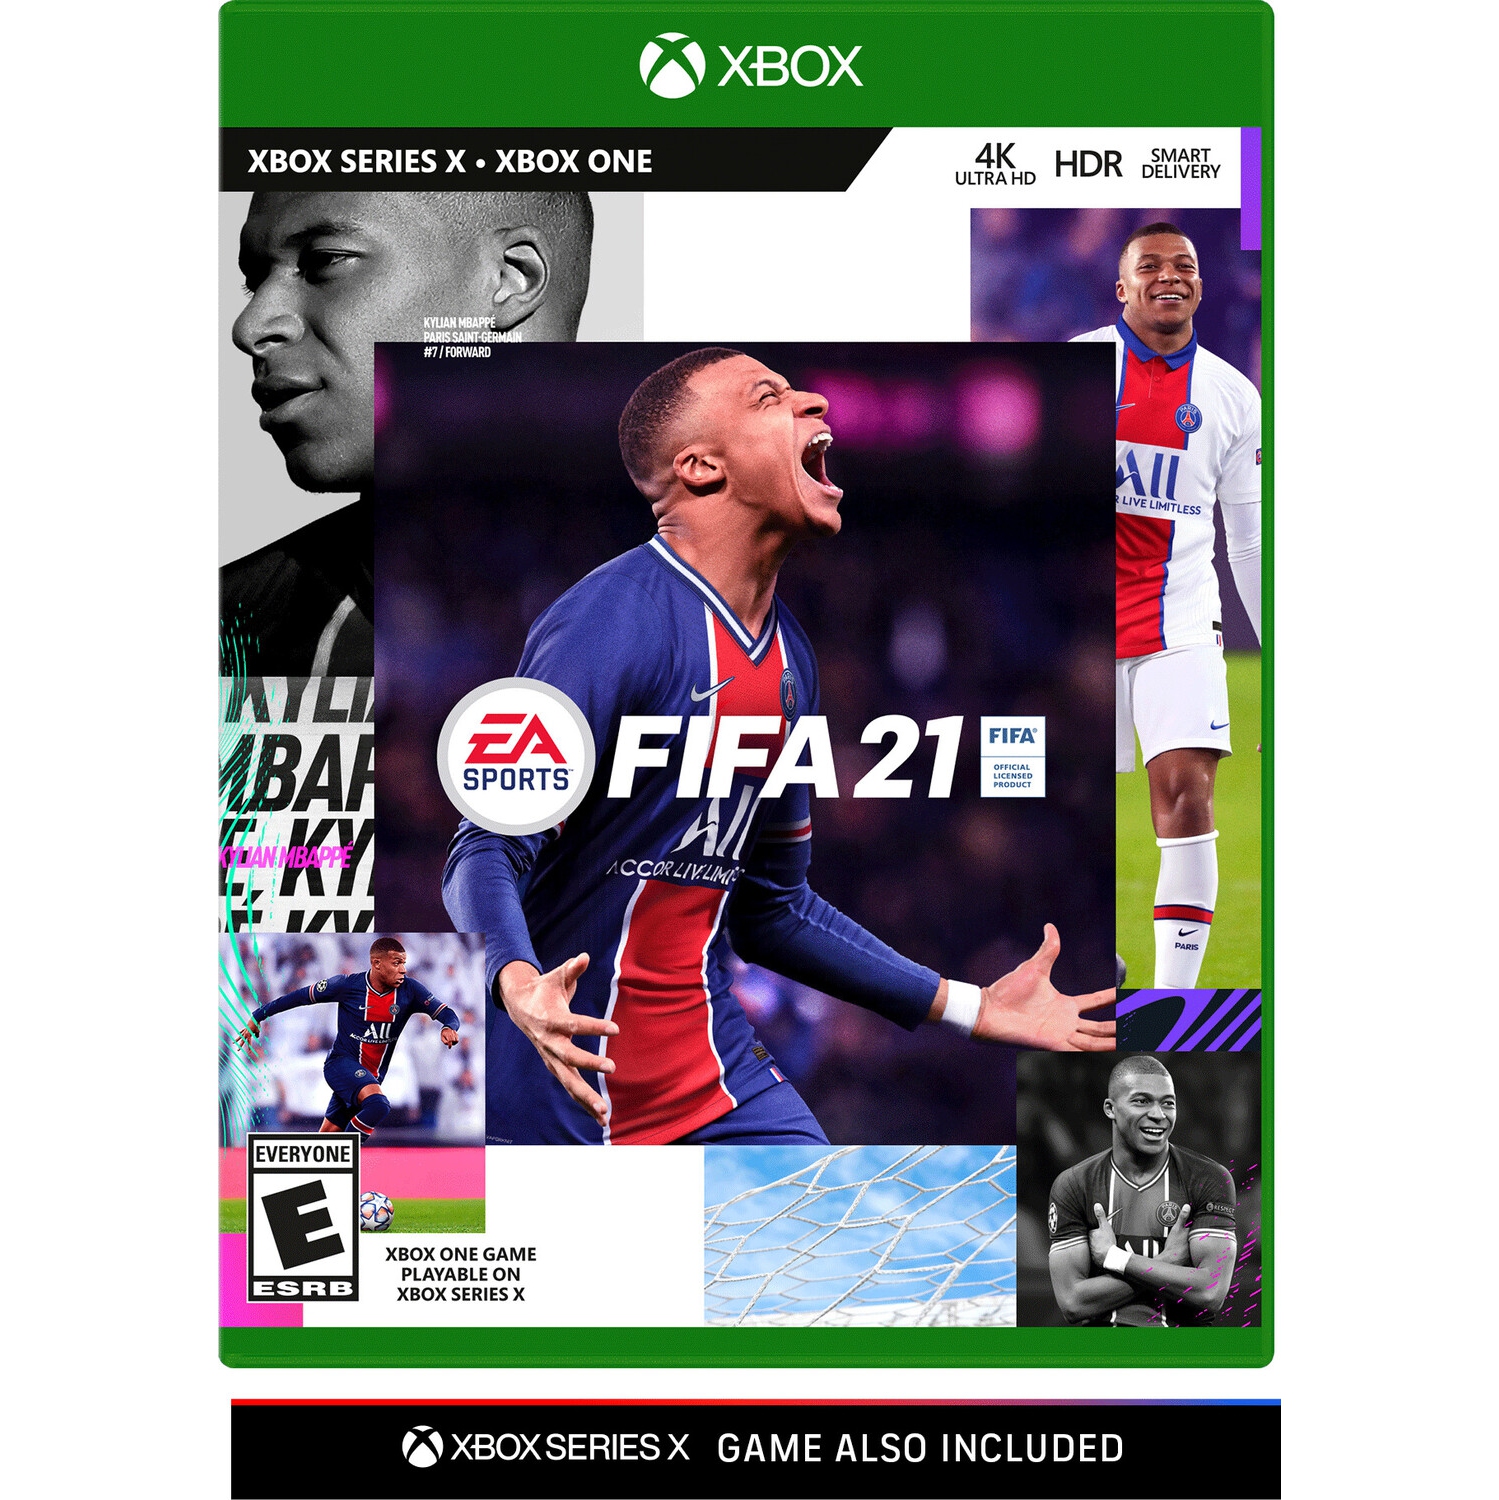 FIFA 21 for Xbox One [VIDEOGAMES] Xbox One